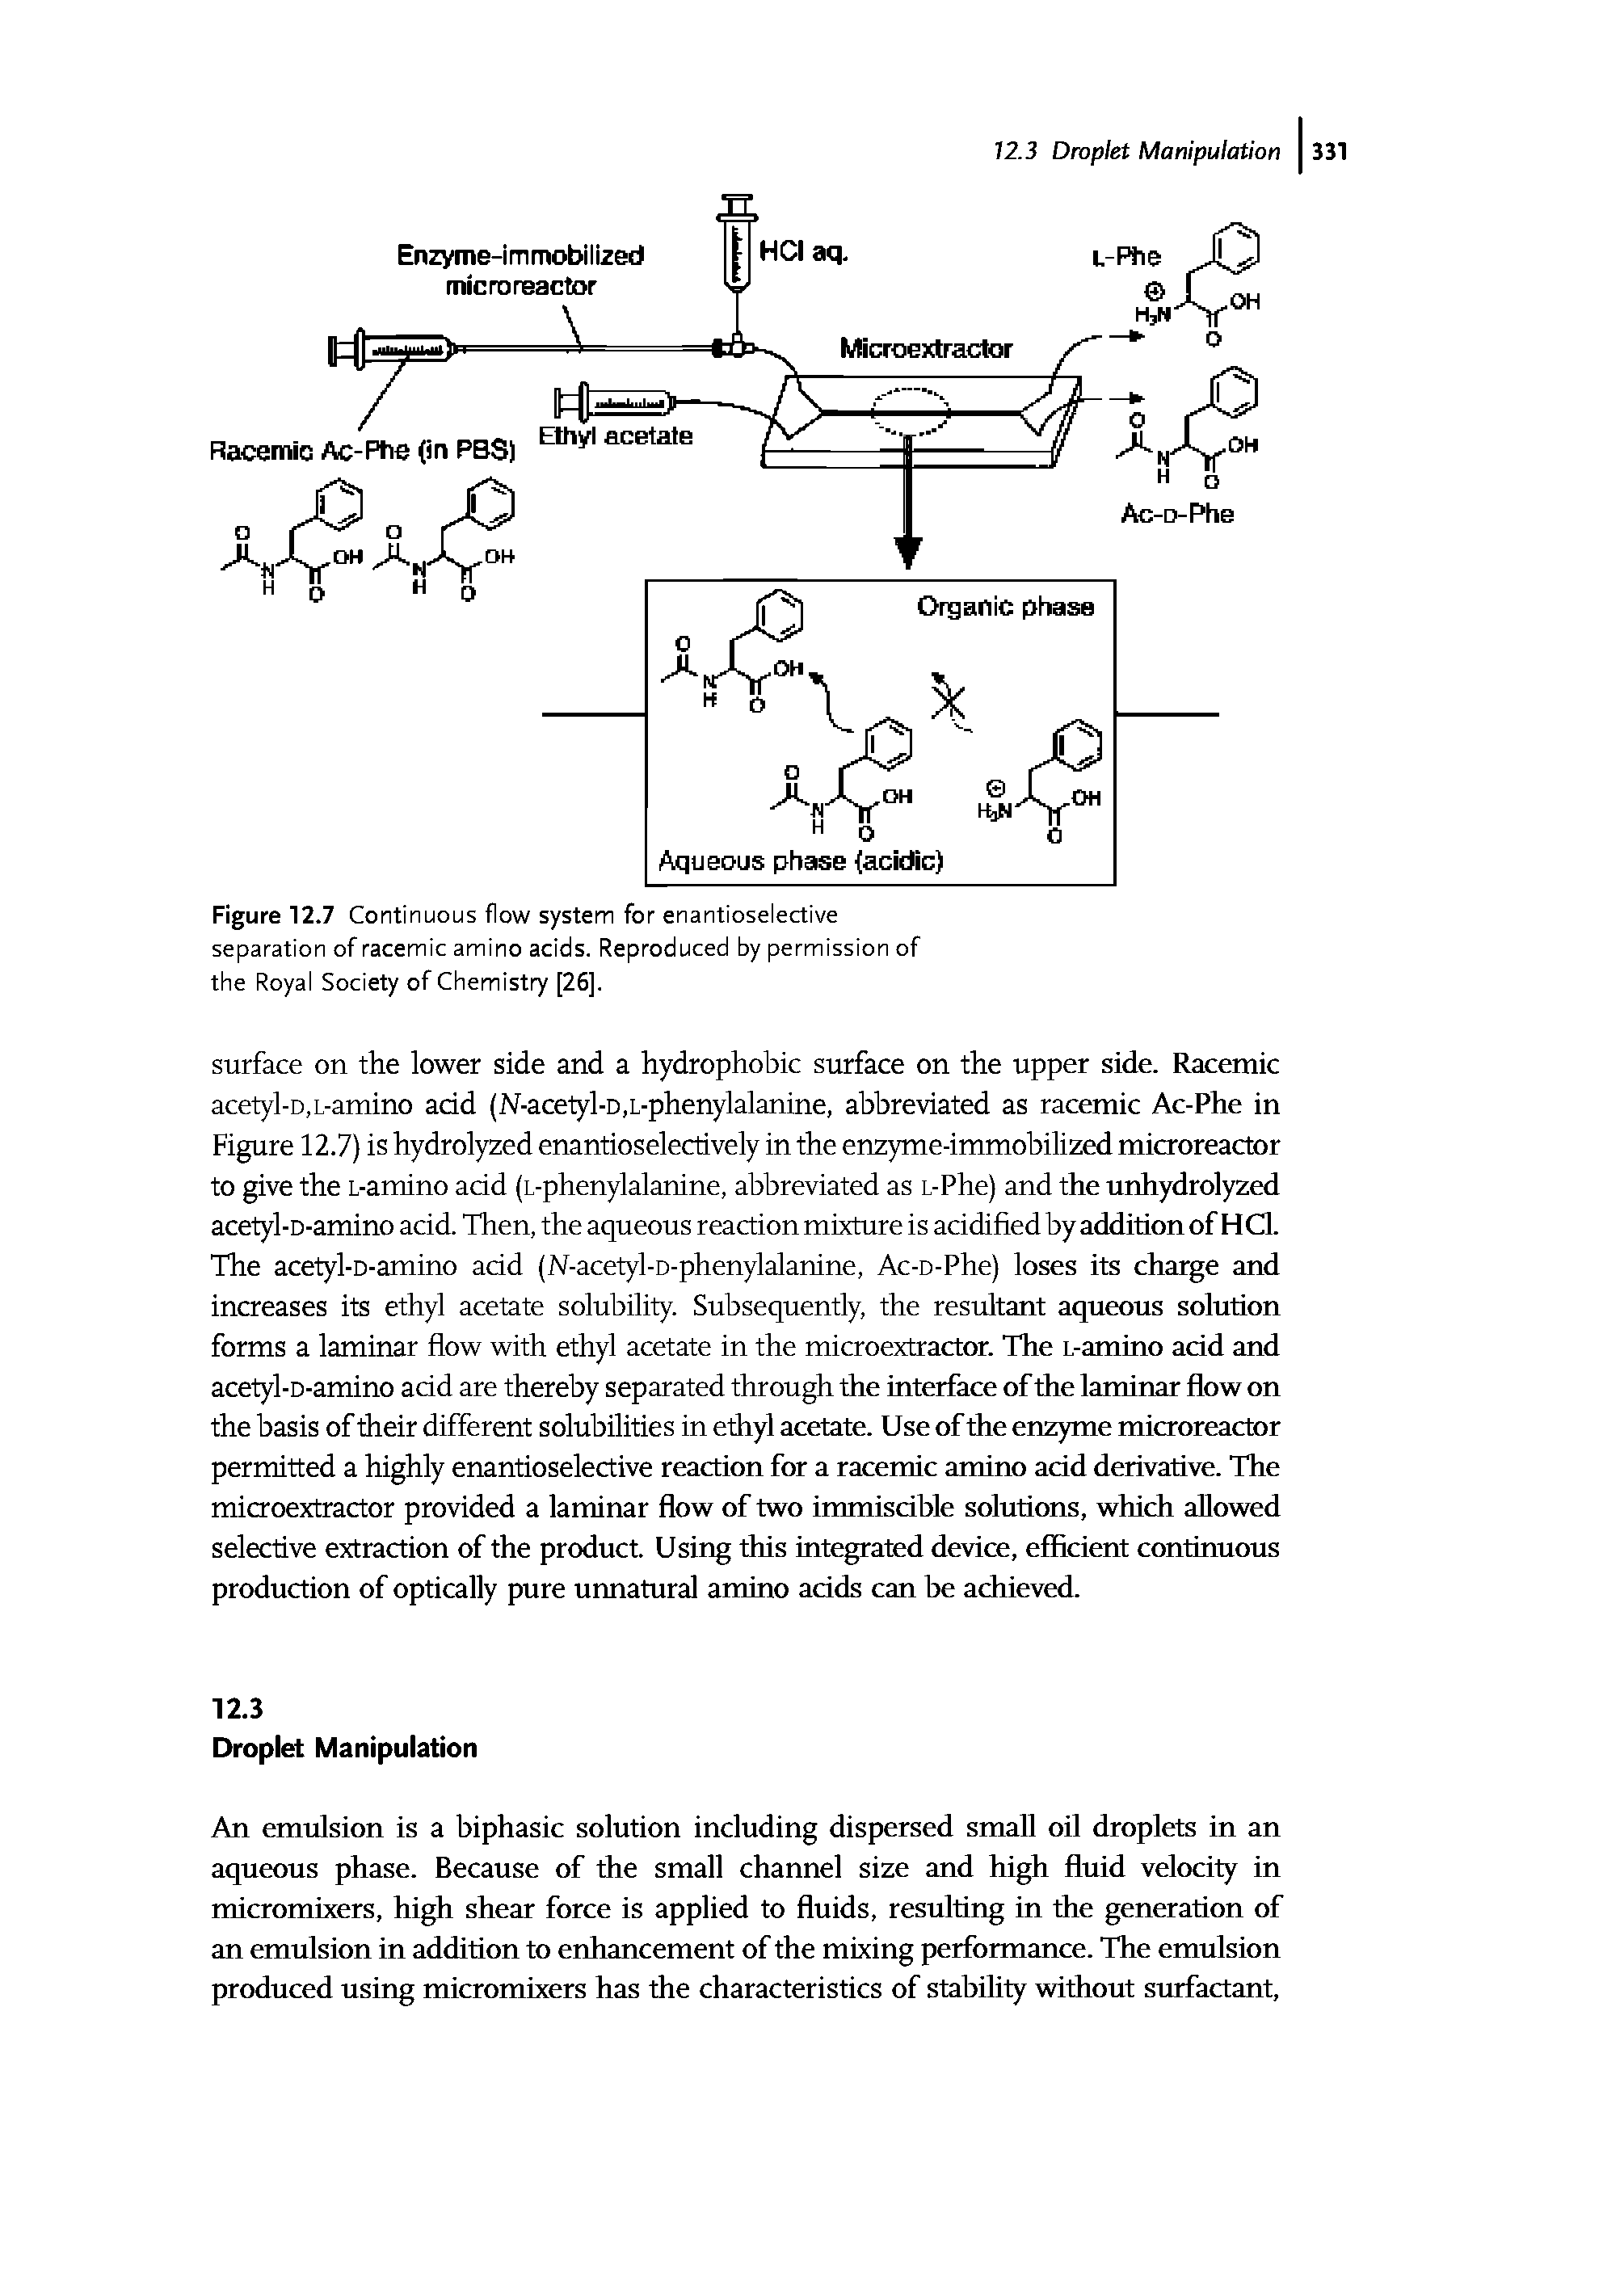 Figure 12.7 Continuous flow system for enantioselective separation of racemic amino acids. Reproduced by permission of the Royal Society of Chemist [26].